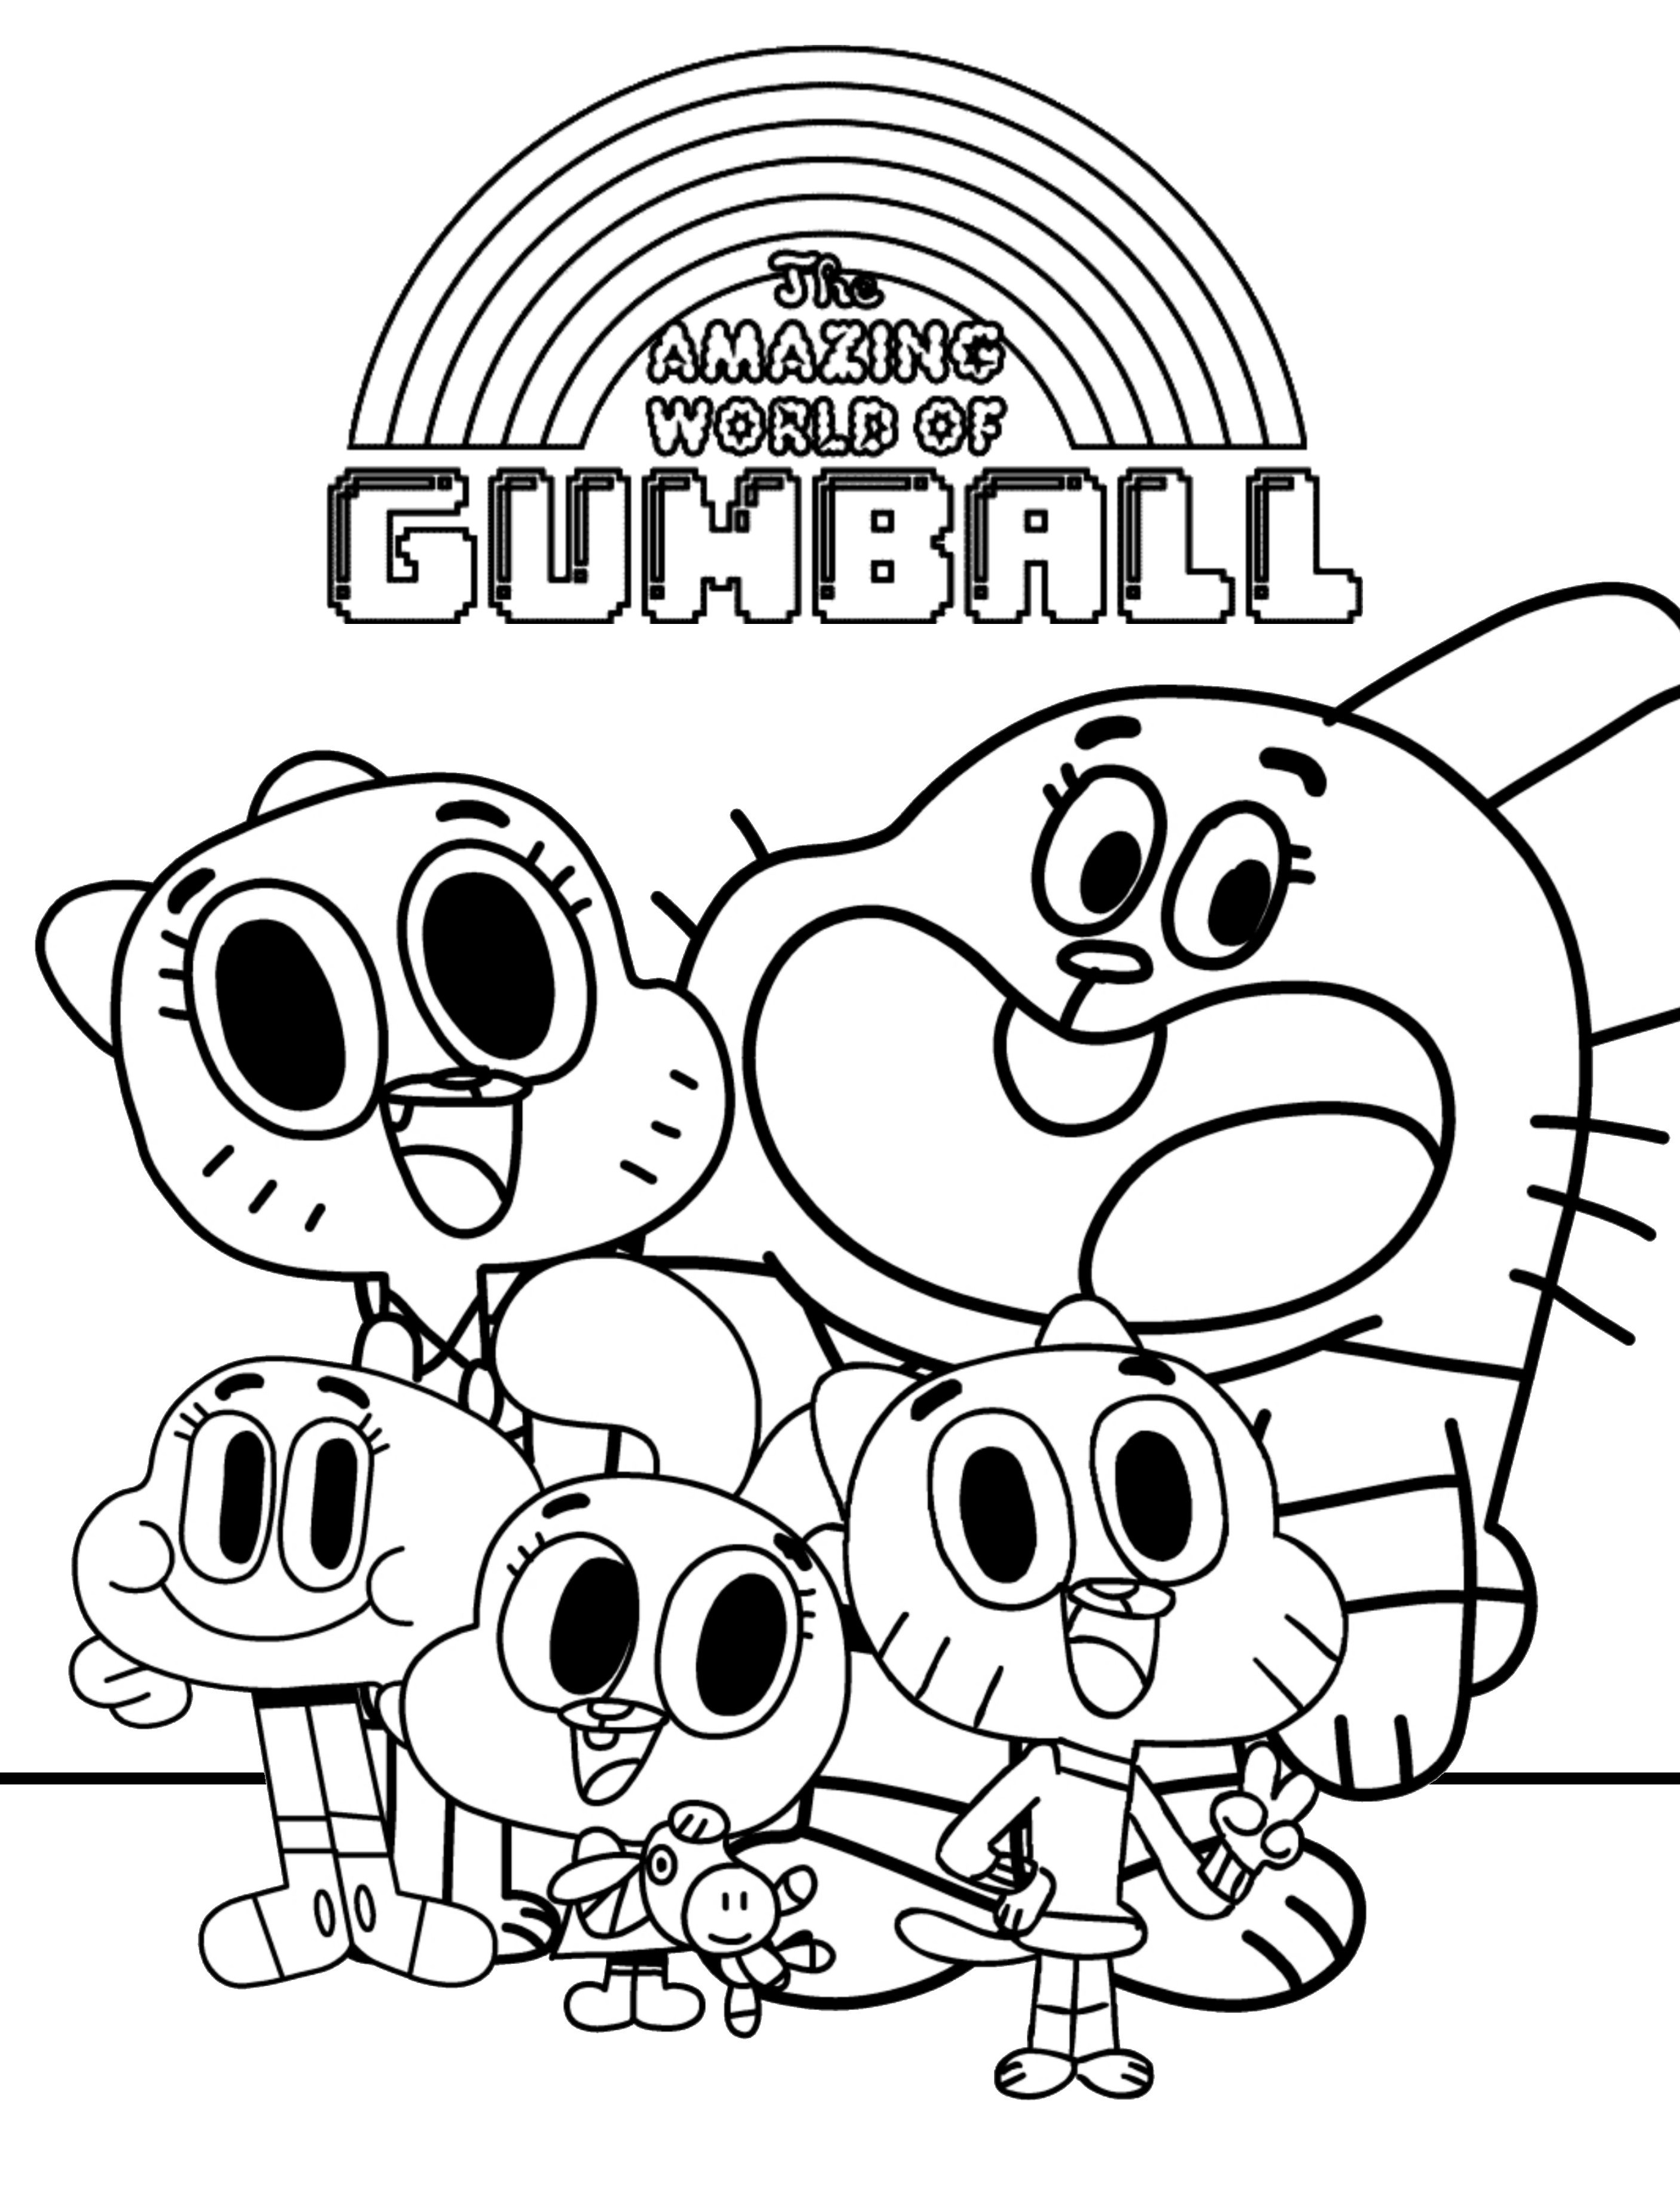 Amazing World Of Gumball Coloring Pages Pdf For Kids - Free Amazing World Of Gumball Coloring Pages